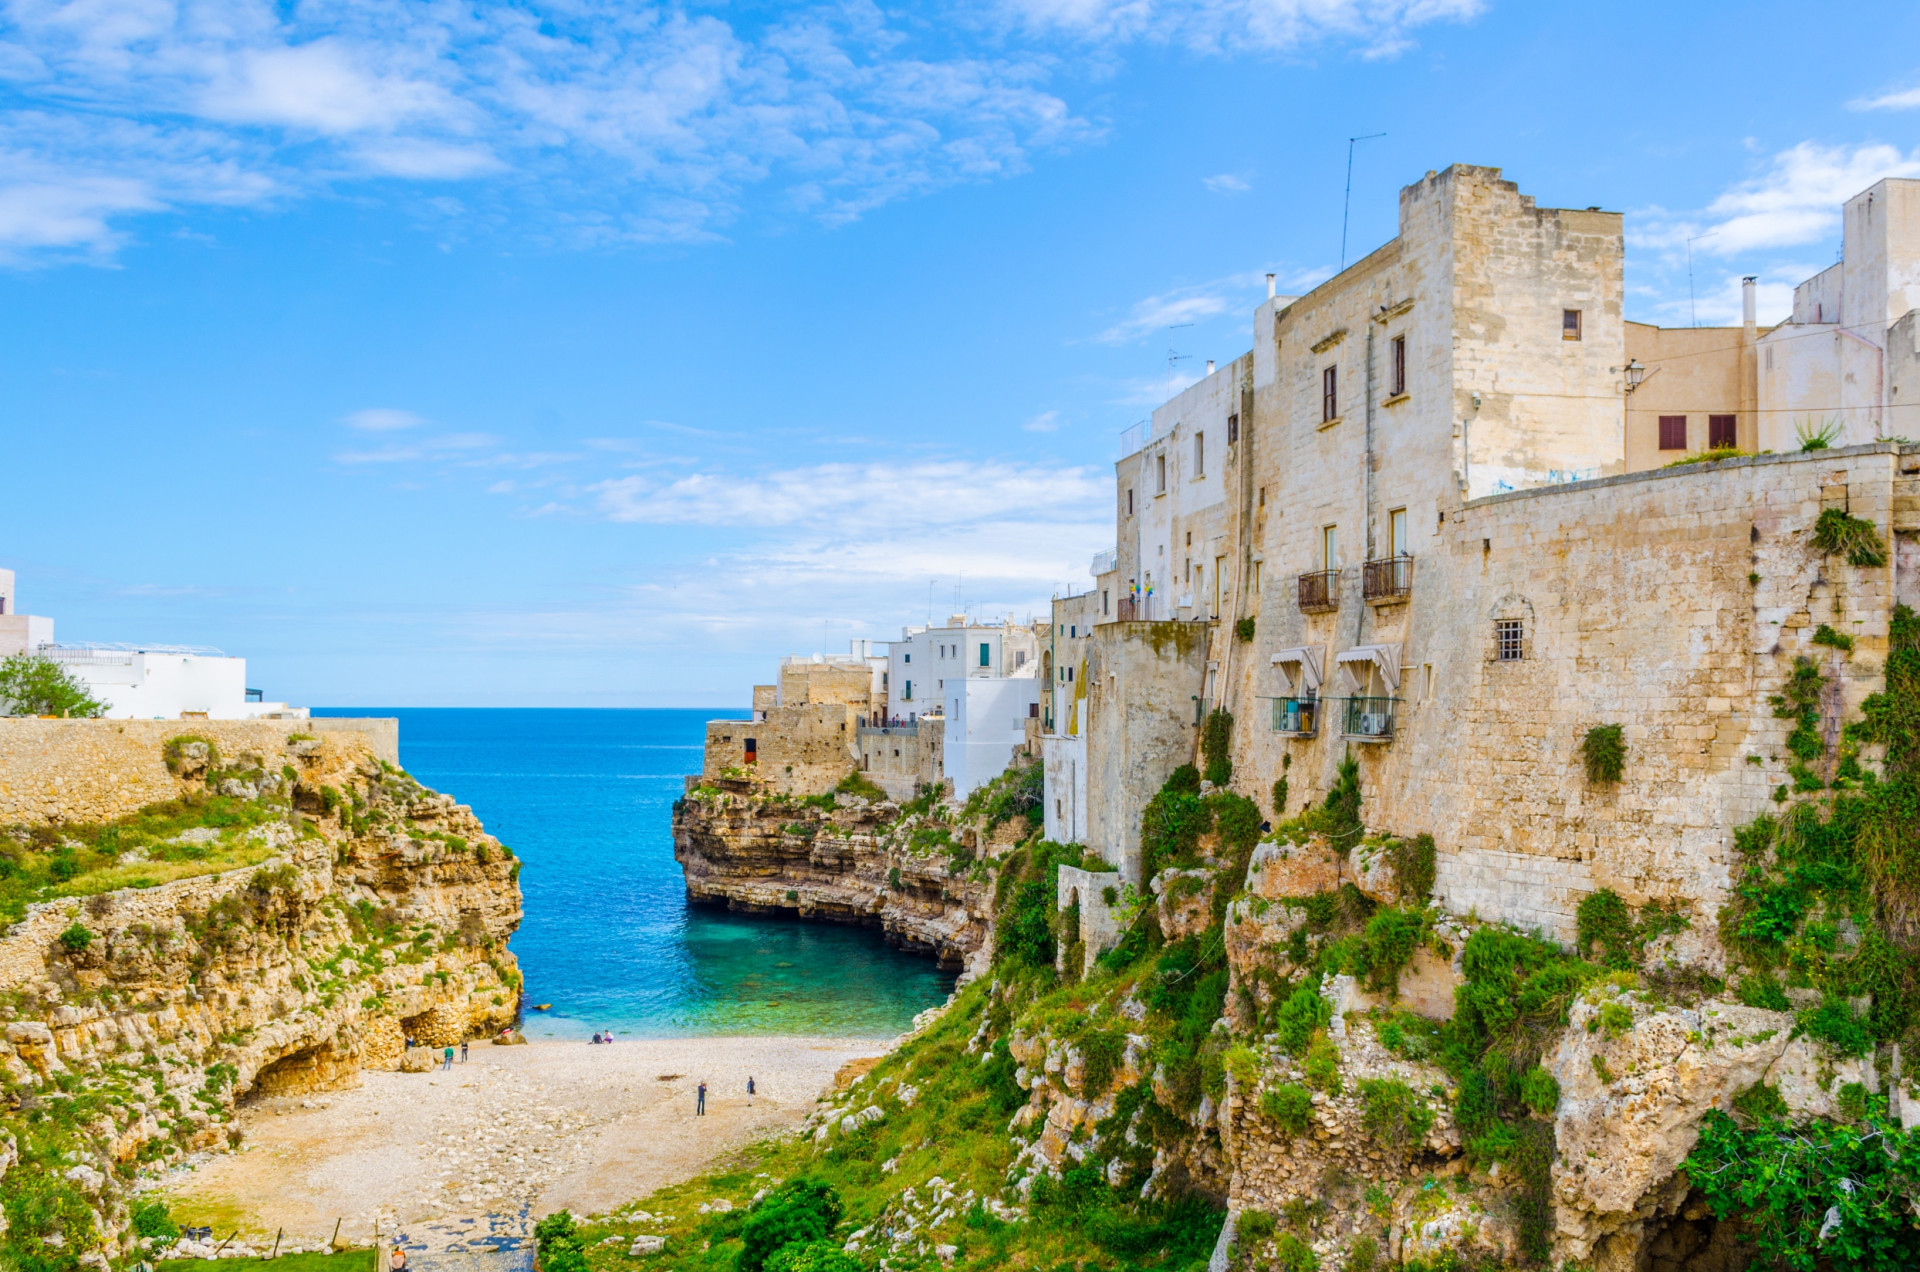 <p>Score: 4.153</p> <p>Lama Monachile beach is set in a rocky sea inlet, surrounded with high cliffs and houses in the town of Polignano a Mare.</p>